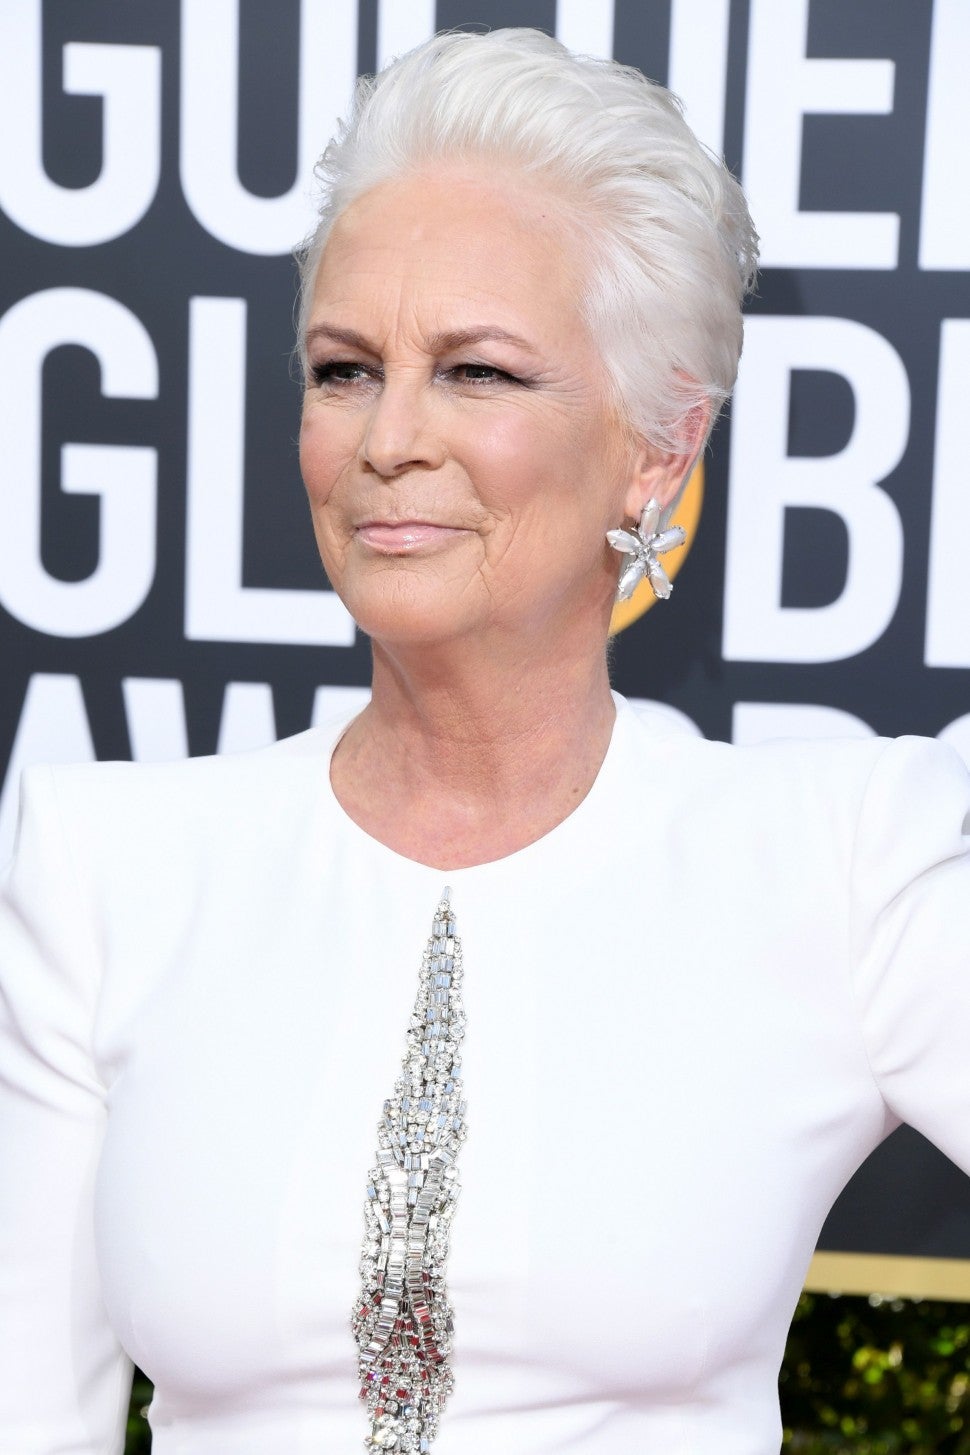 Jamie Lee Curtis Stuns With Icy White Hair and Matching Dress at 2019